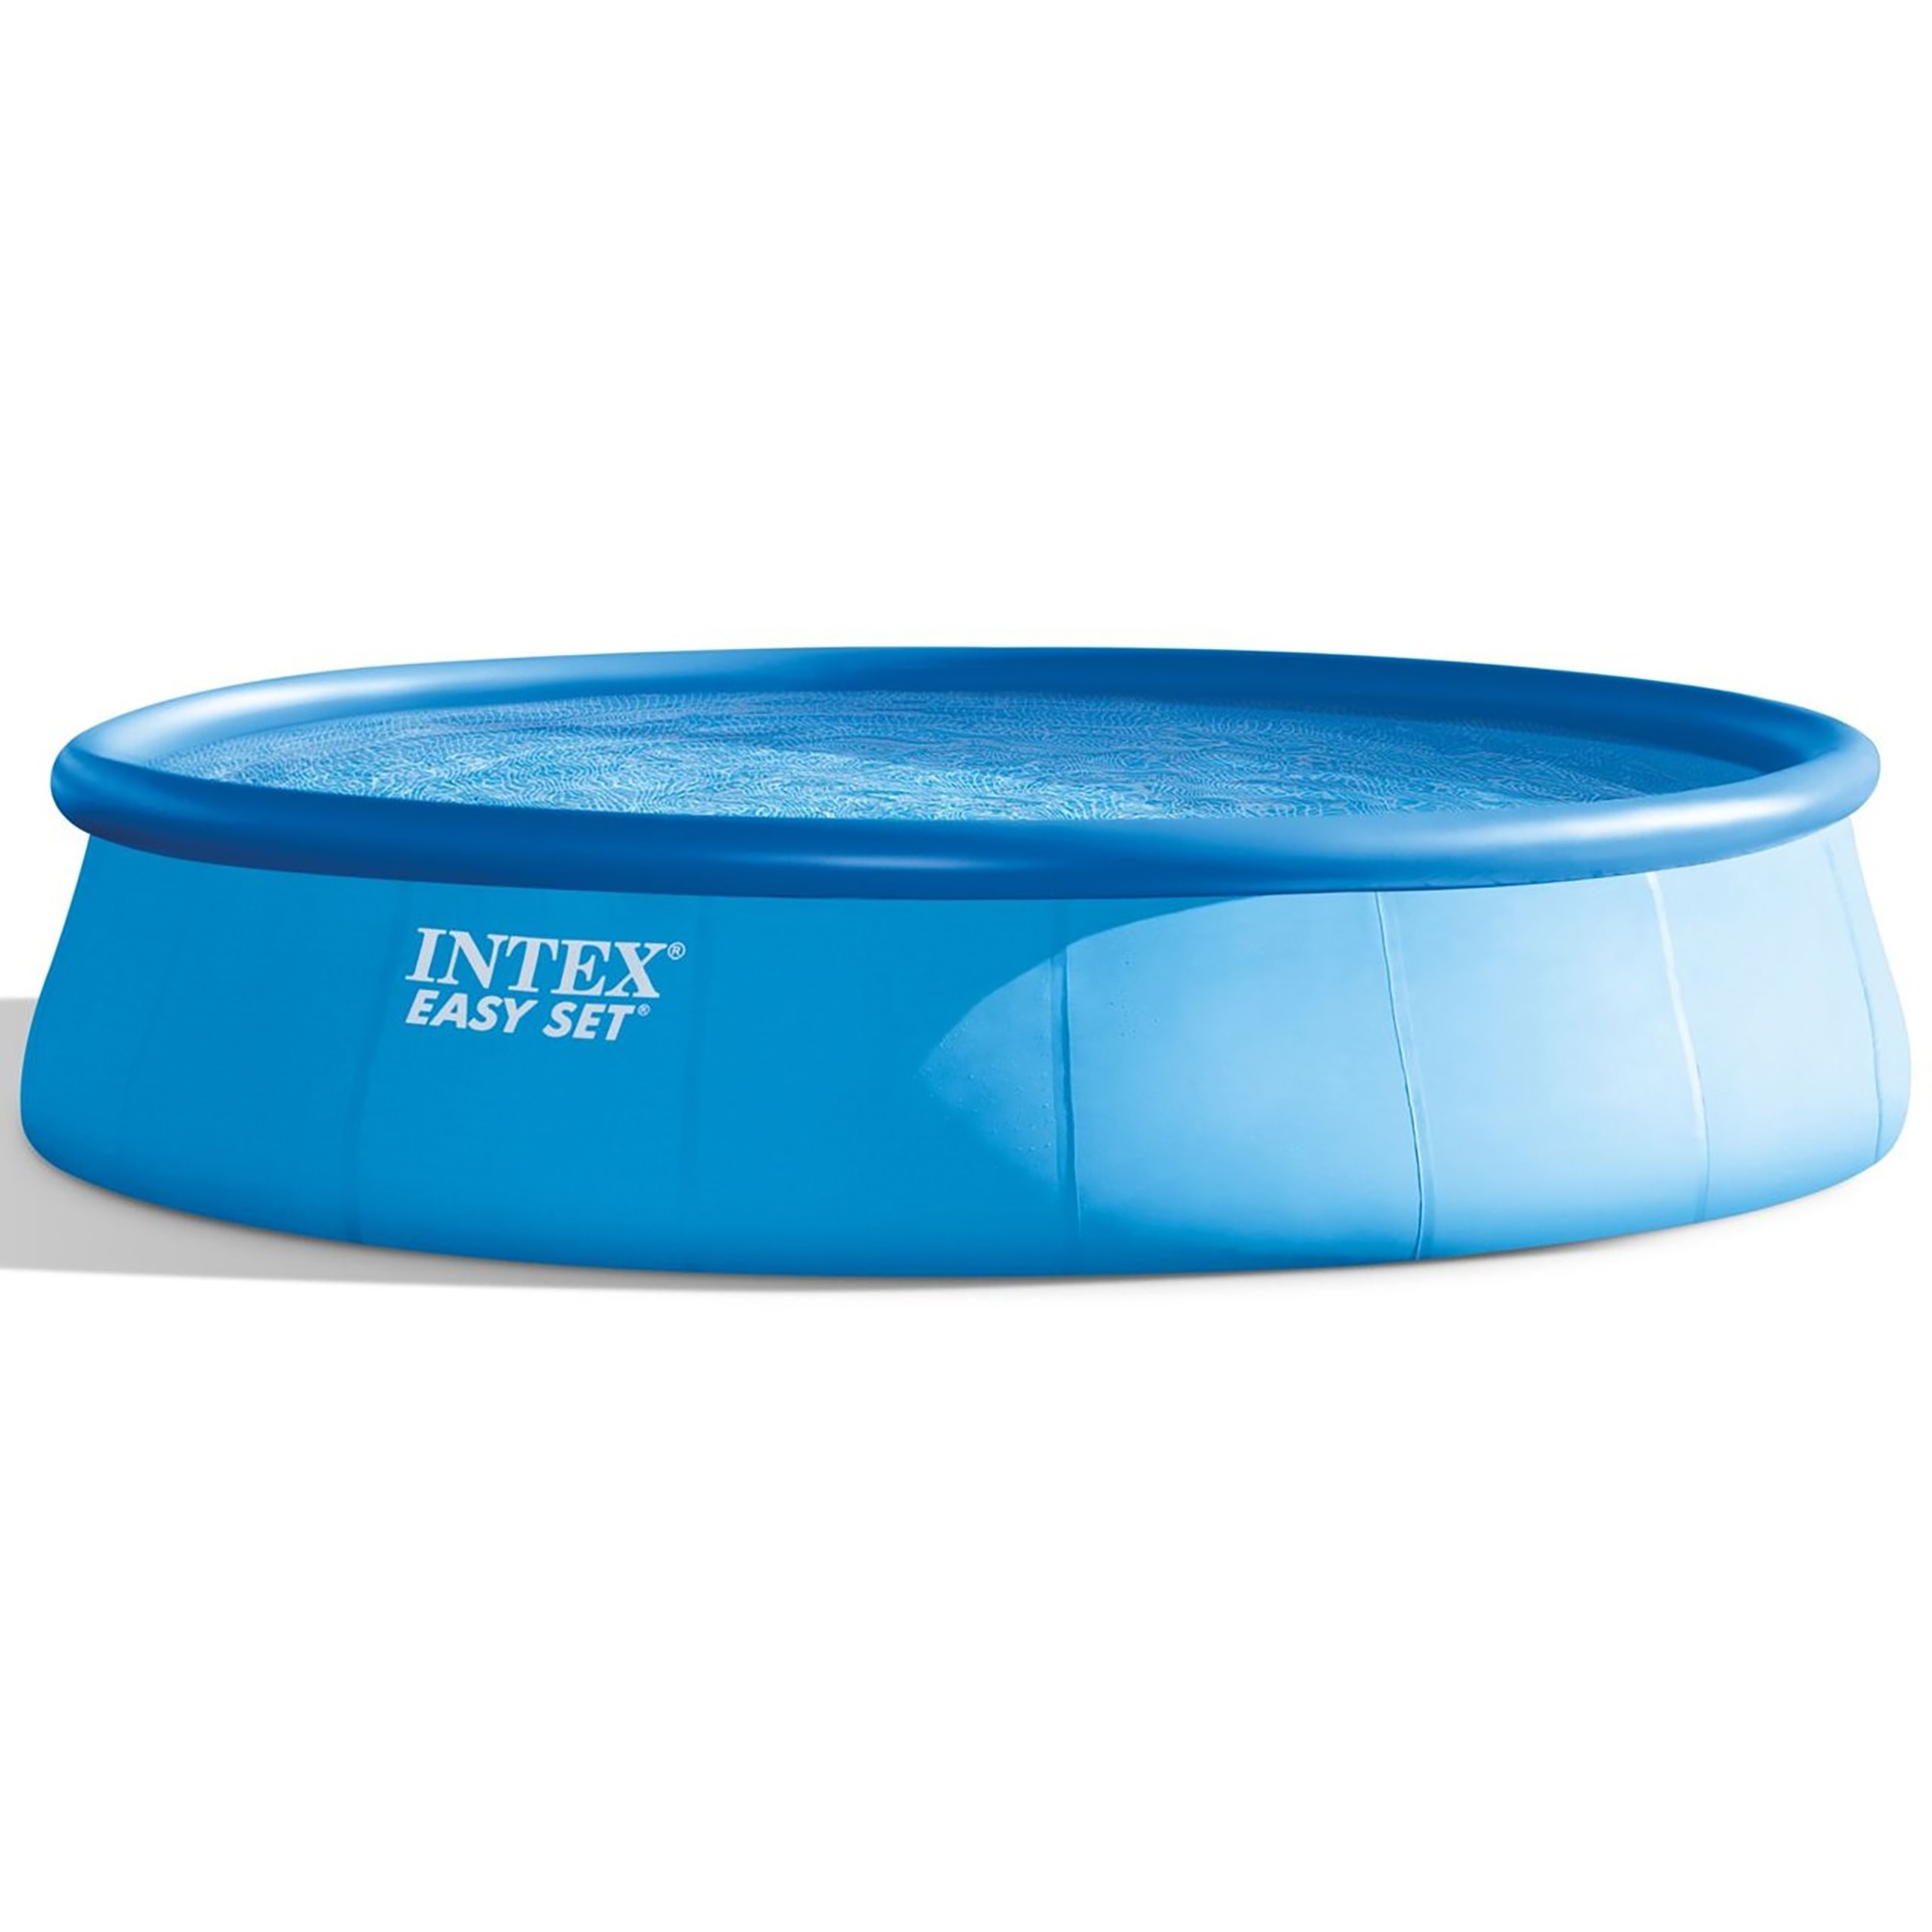 Intex: Easy Set 18' x 48" Inflatable Pool w/ Filter Pump, Above Ground Pool Set, 5455 Gallon Capacity, Hydro Aeration Technology, Includes Filter Pump, Ground Cloth, Pool Cover & Ladder,  Ages 6+ - image 1 of 12